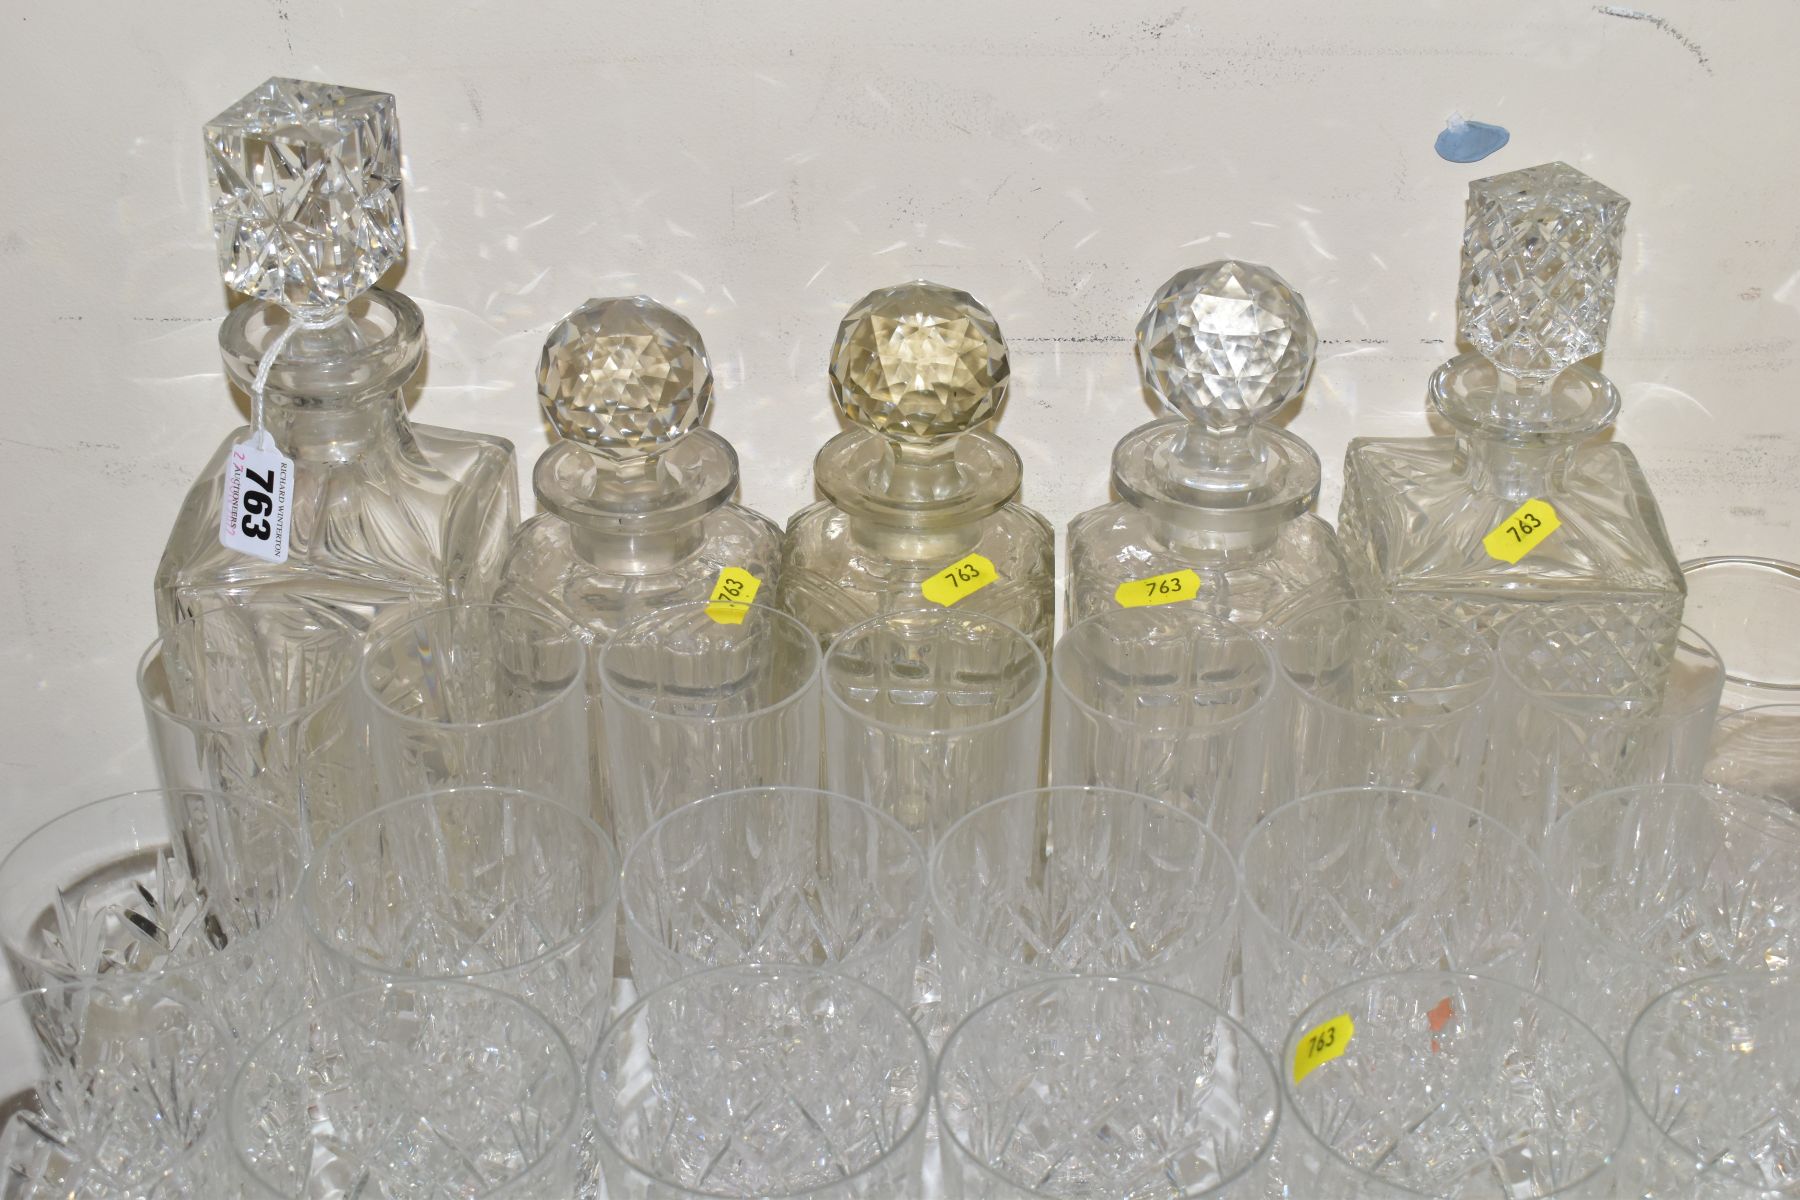 A LARGE COLLECTION OF DRINKING GLASSES, FIVE DECANTERS, A BOXED SET OF ROYAL SEFTON CRYSTAL WINE - Bild 2 aus 7